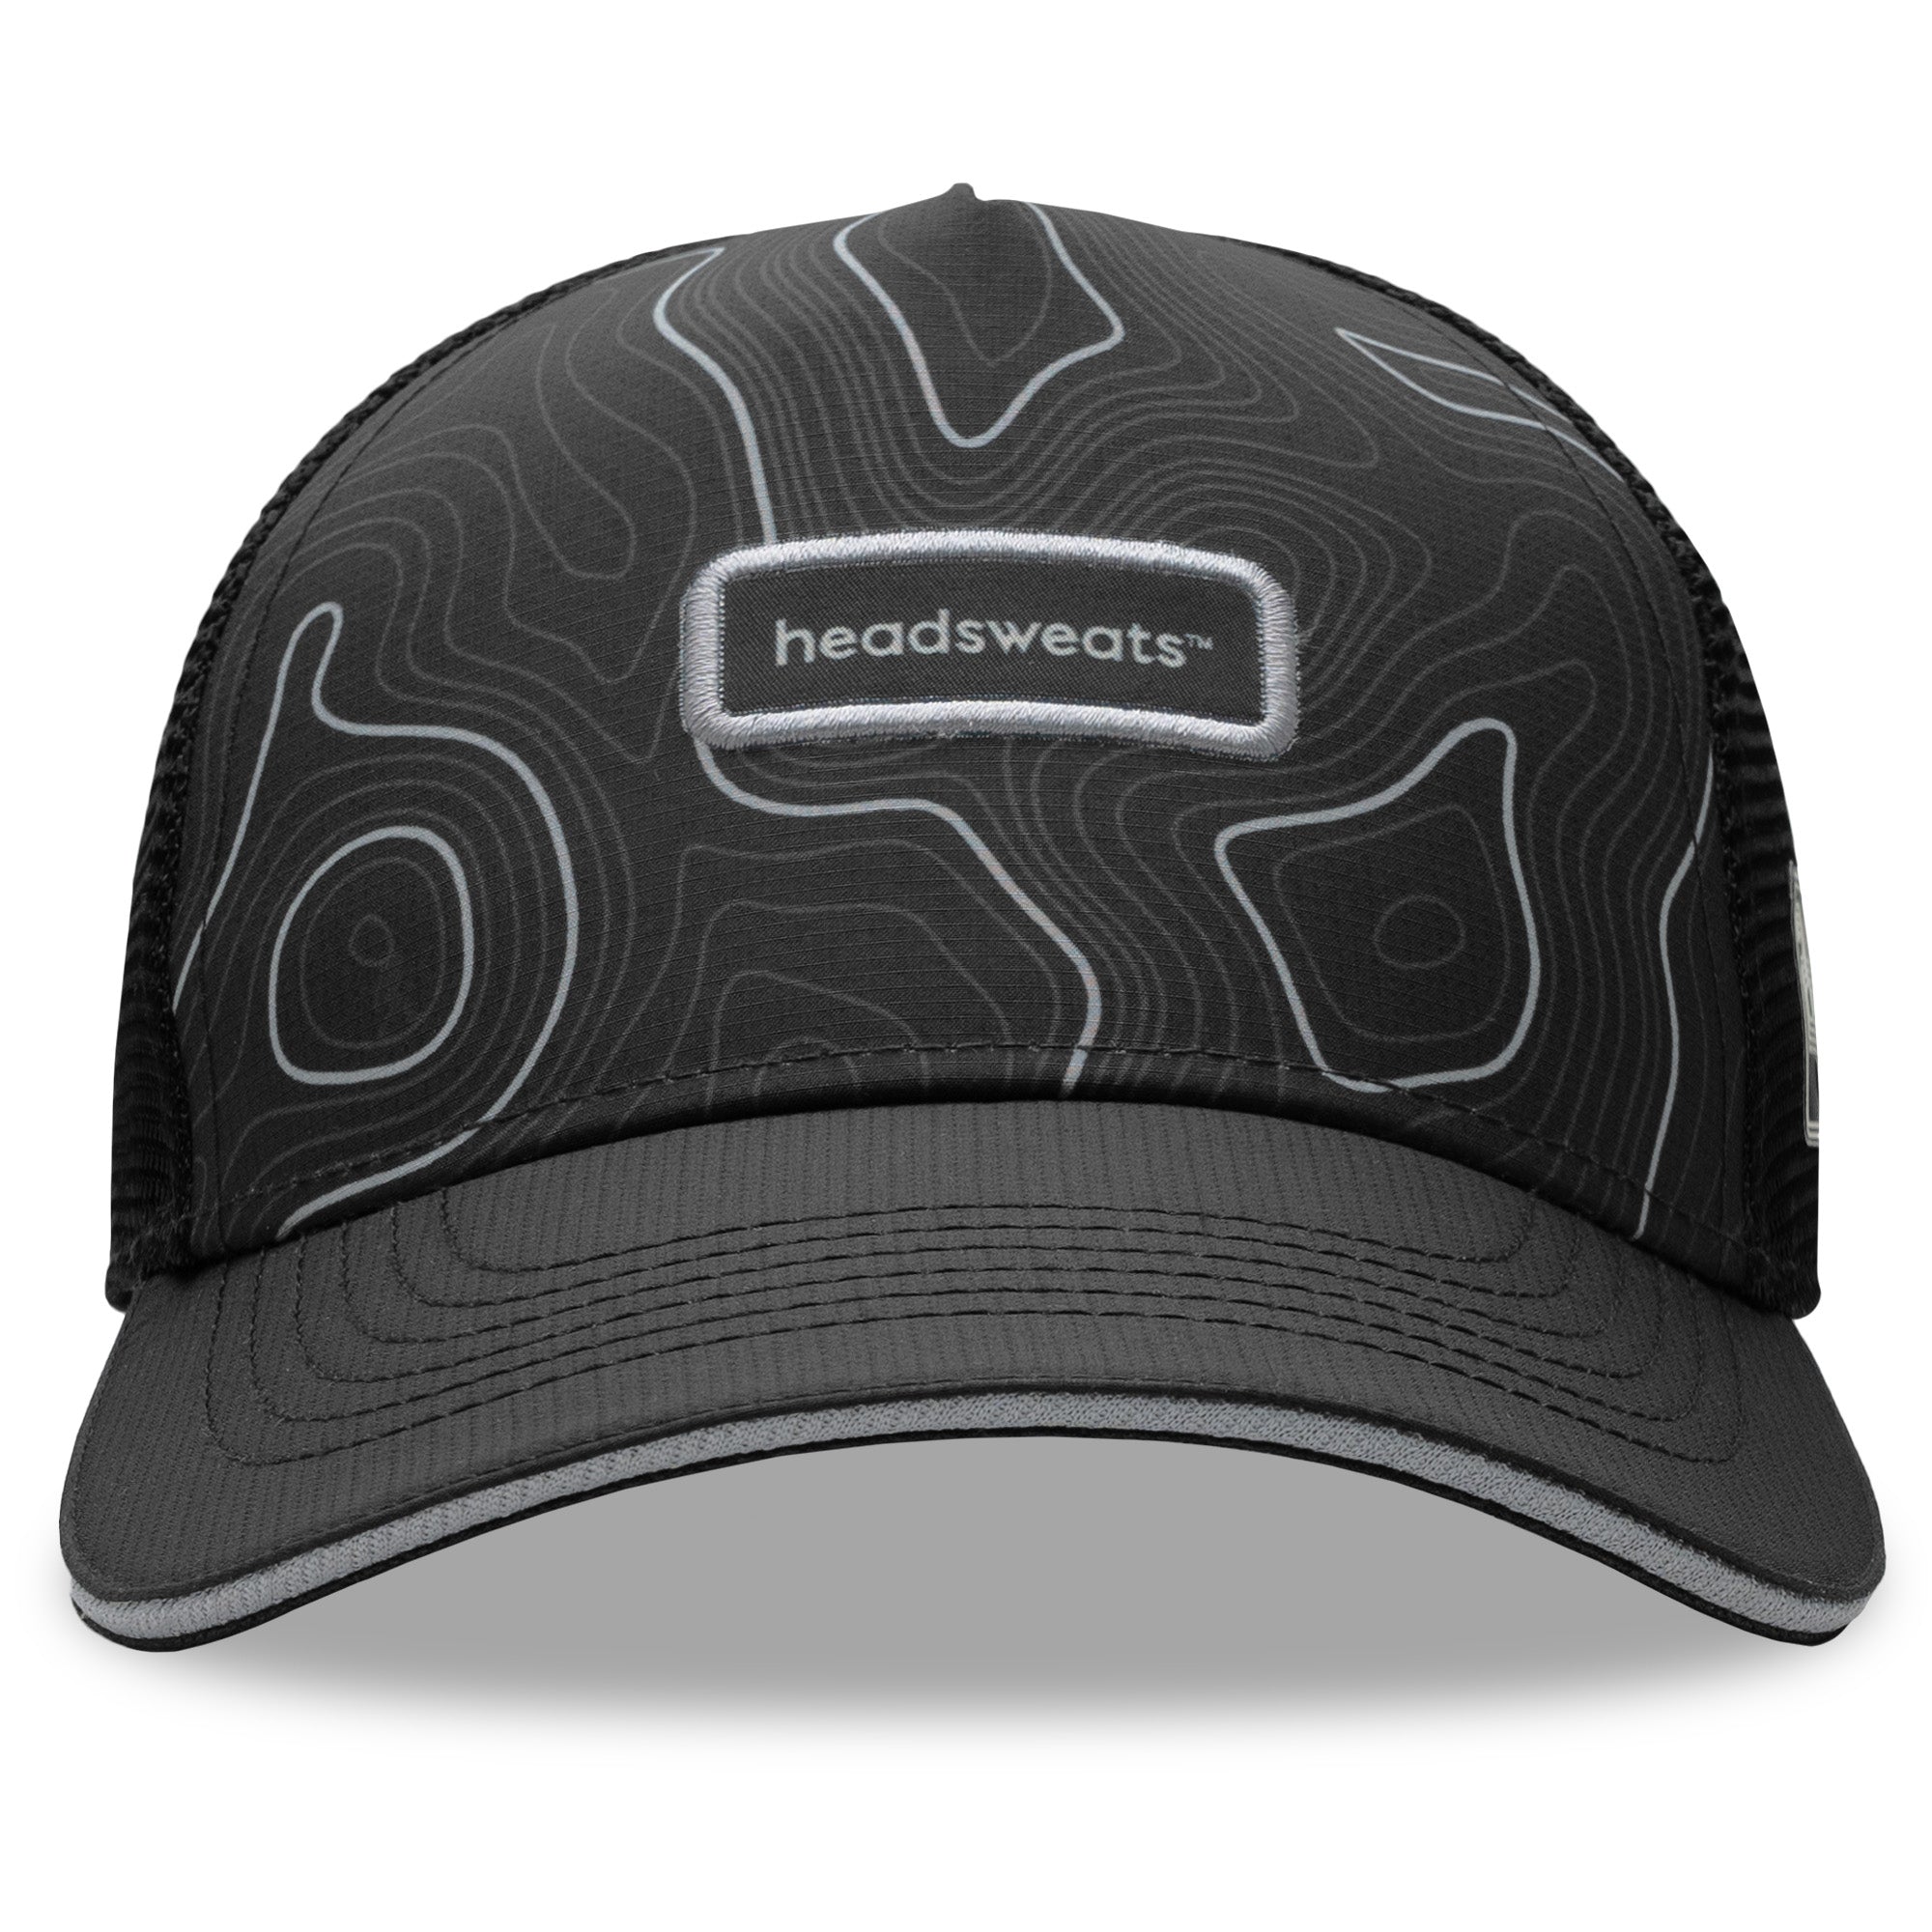 Headsweats: World Leader in Performance Hats, Apparel, Visors and More